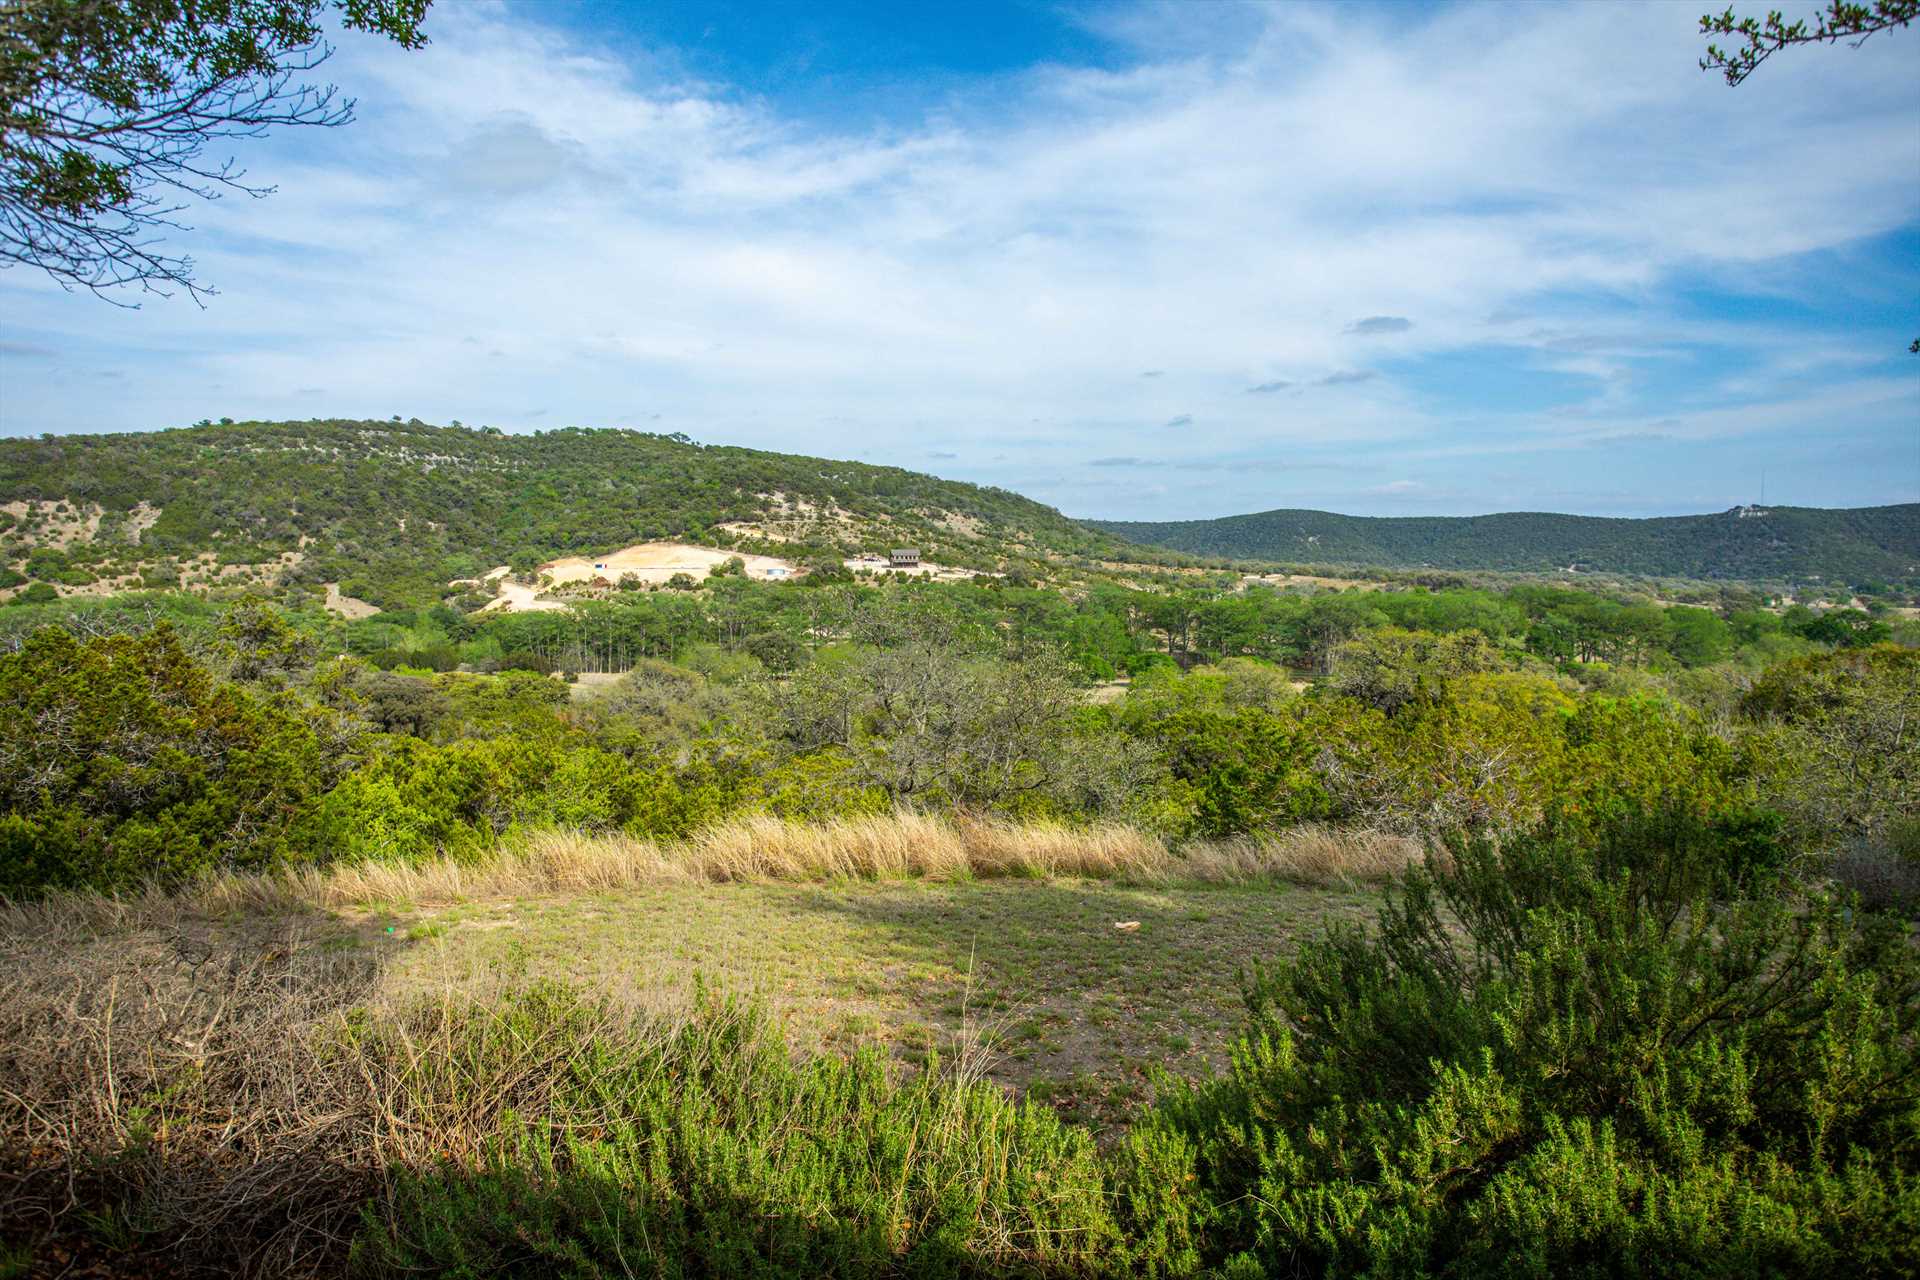                                                 Photos just don't do the majestic Hill Country views justice here! This setting is amazing for stargazing and vividly-colored sunsets.